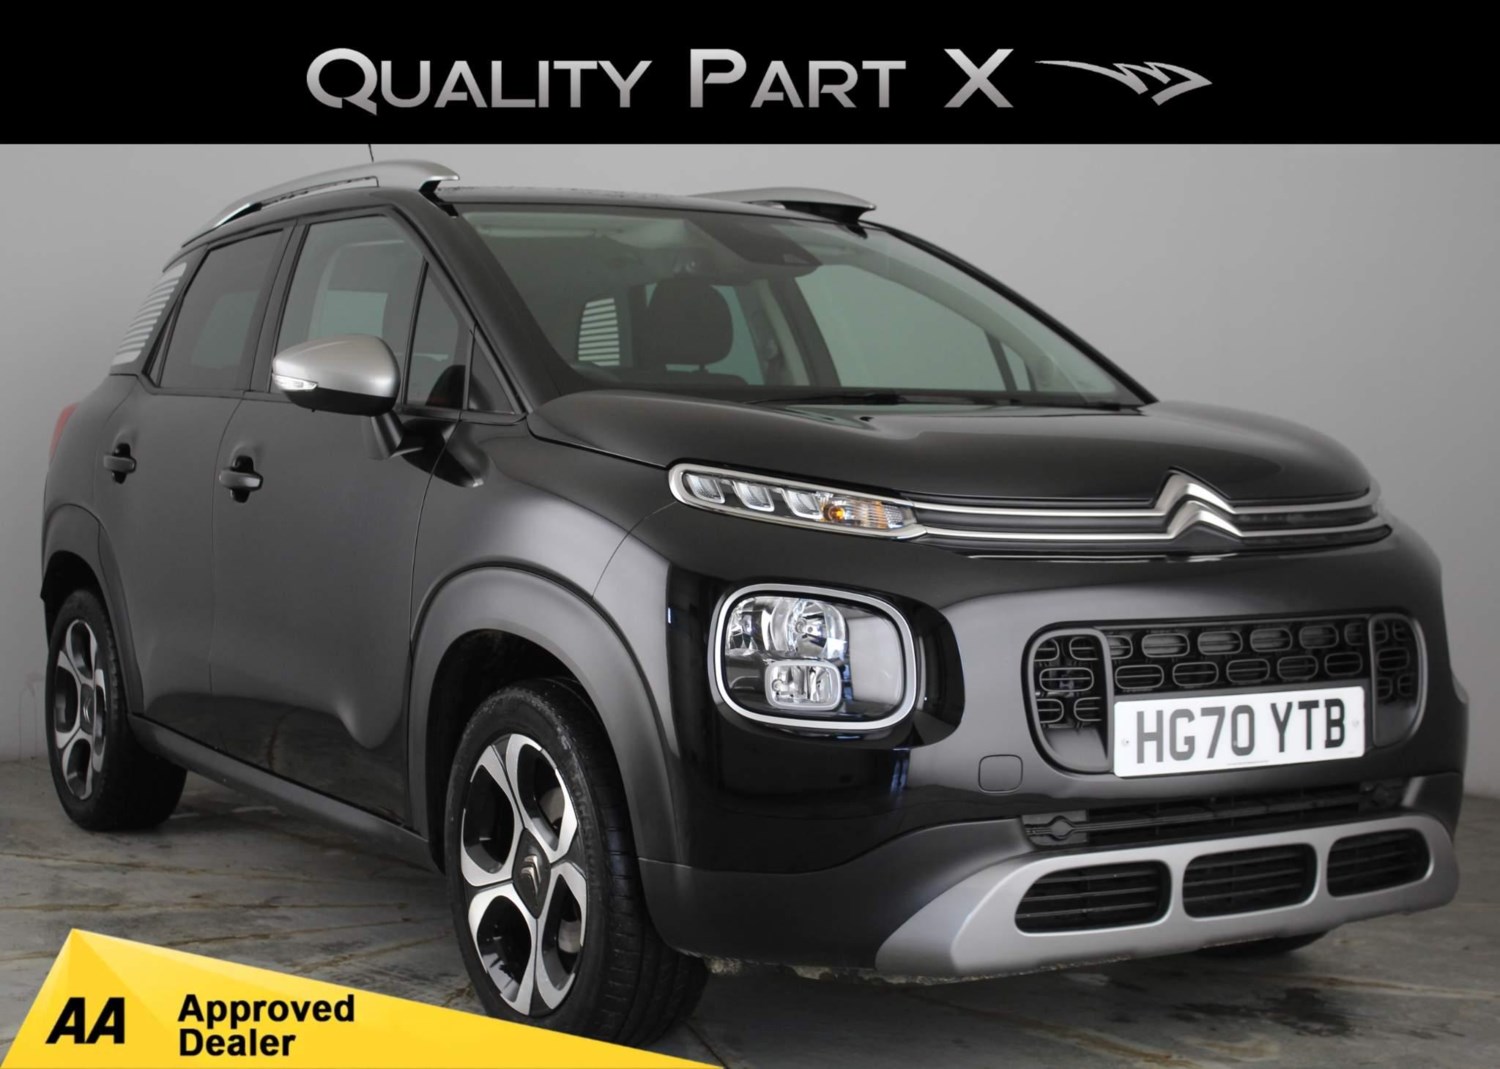 2020 used Citroen C3 Aircross 1.2 PureTech Flair EAT6 Euro 6 (s/s) 5dr